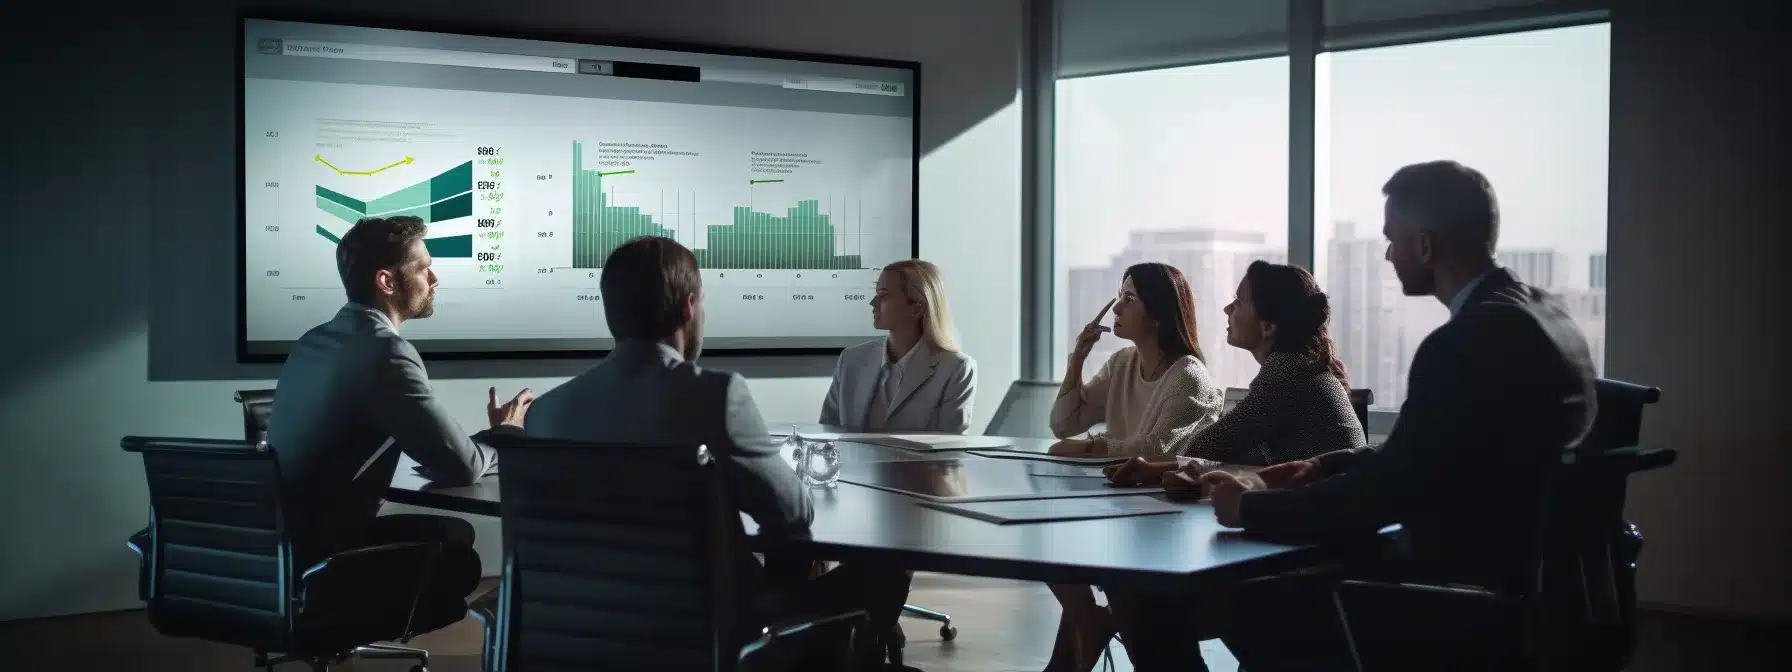 A Group Of Executives Discuss Branding Strategies In A Modern Conference Room With Charts And Graphs Projected On The Screen.